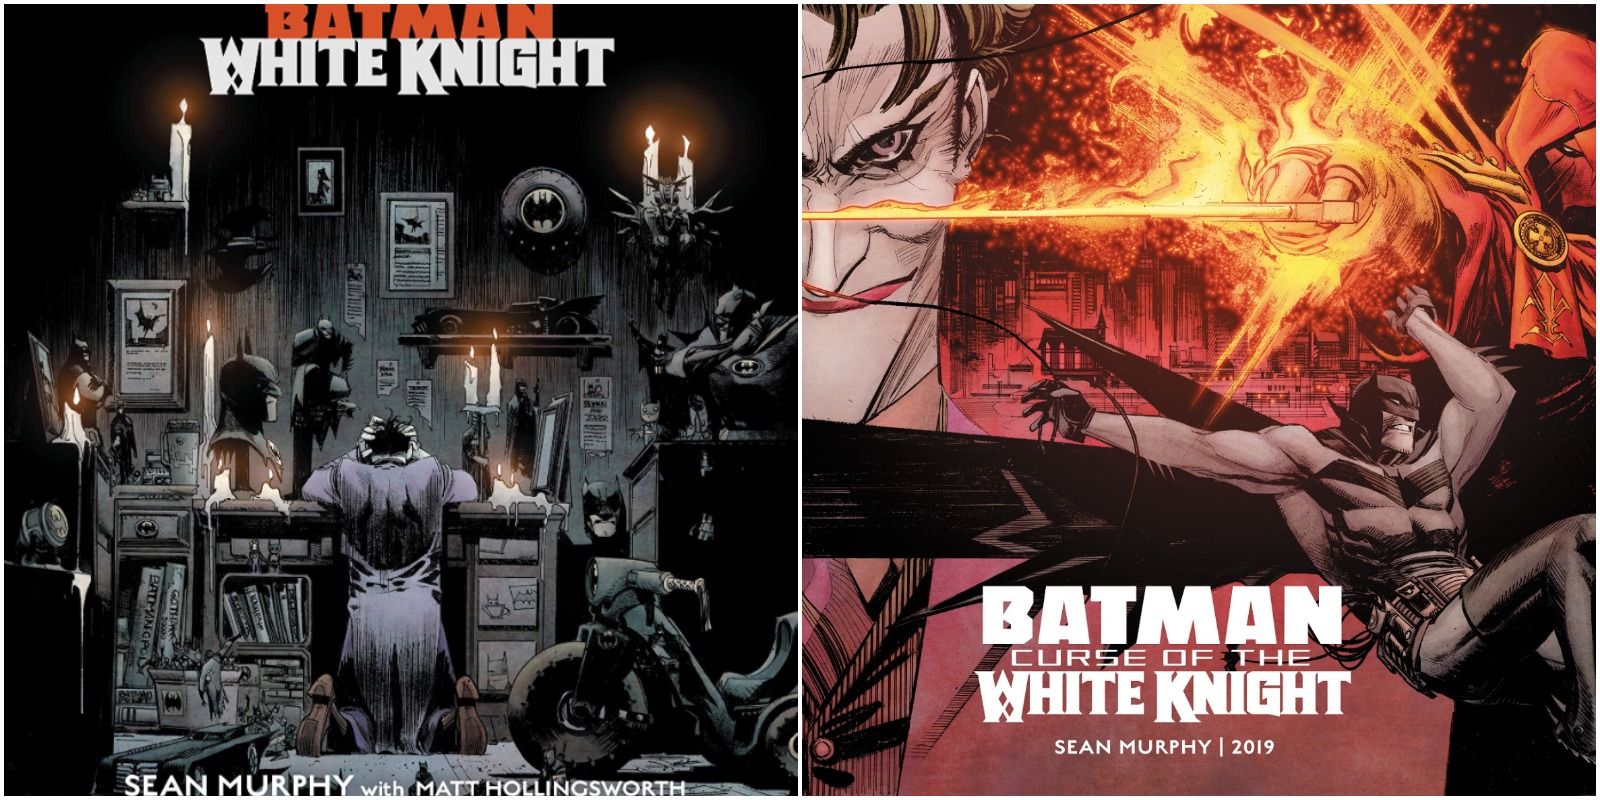 Art for the current main entries in Sean Murphy's White Knight maxiseries, White Knight and Curse of the White Knight